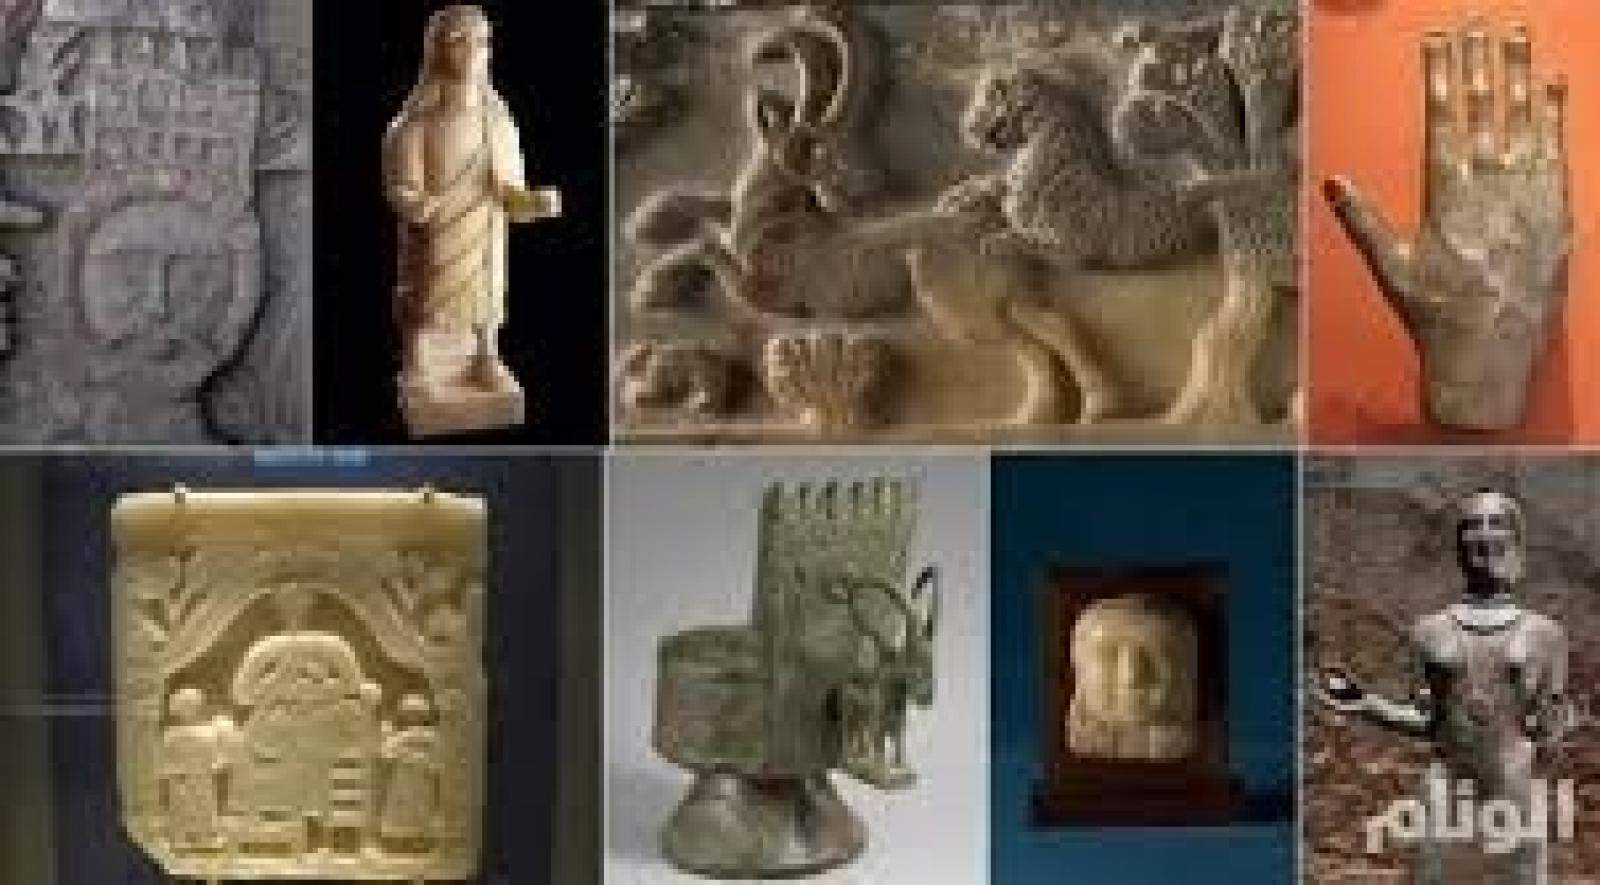 Antiquities looted from Taiz Museum, Noon Post, 5 May 2019